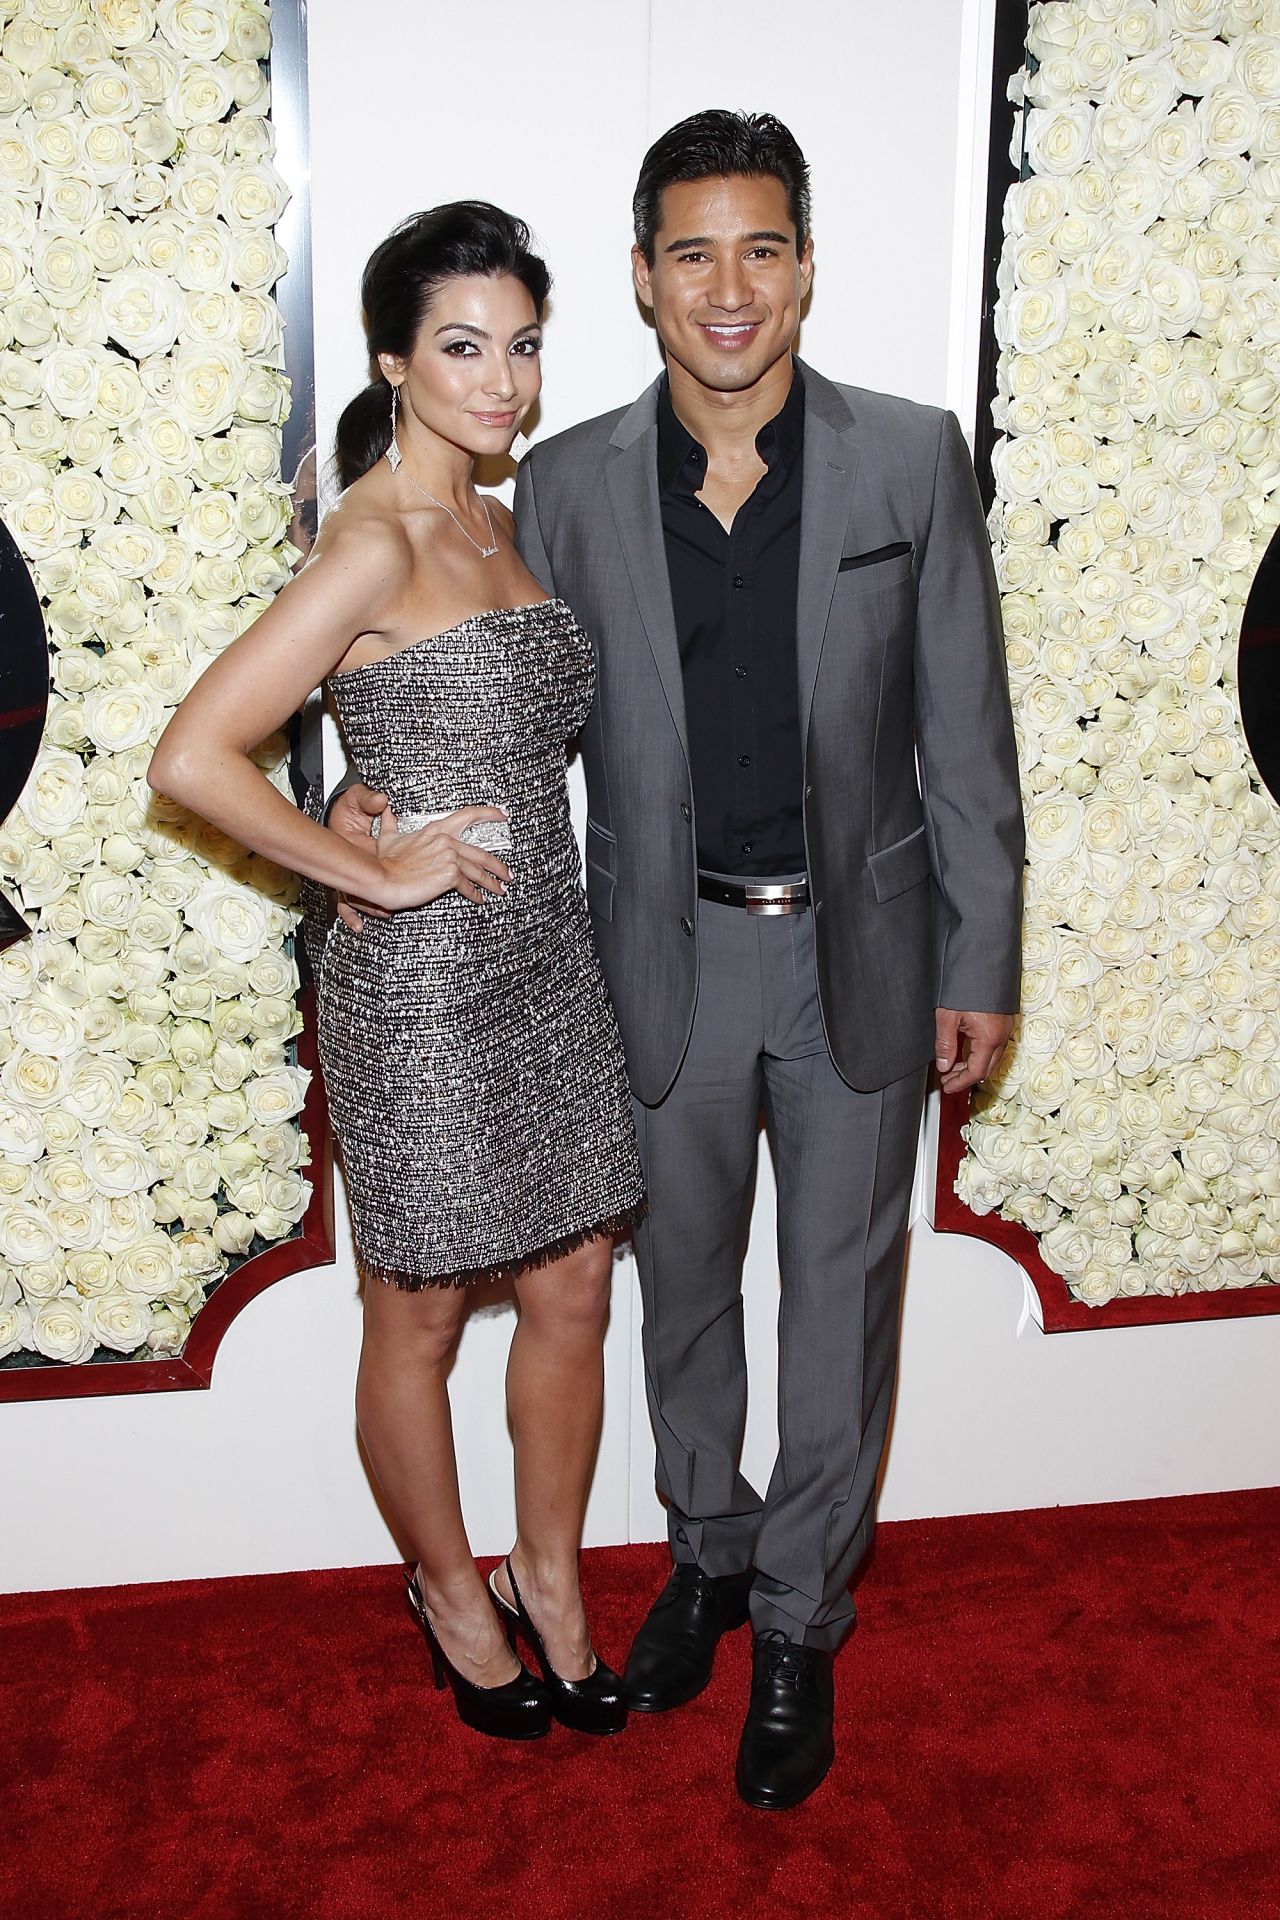 Mario Lopez surprised Courtney Mazza in 2012 with a New Year's proposal while on vacation <a href="http://www.extratv.com/2012/01/04/mario-lopez-begins-the-new-year-with-a-surprise-proposal-to-courtney-mazza/" target="_blank" target="_blank">with friends and family in Mexico. </a>They are now the parents of two.